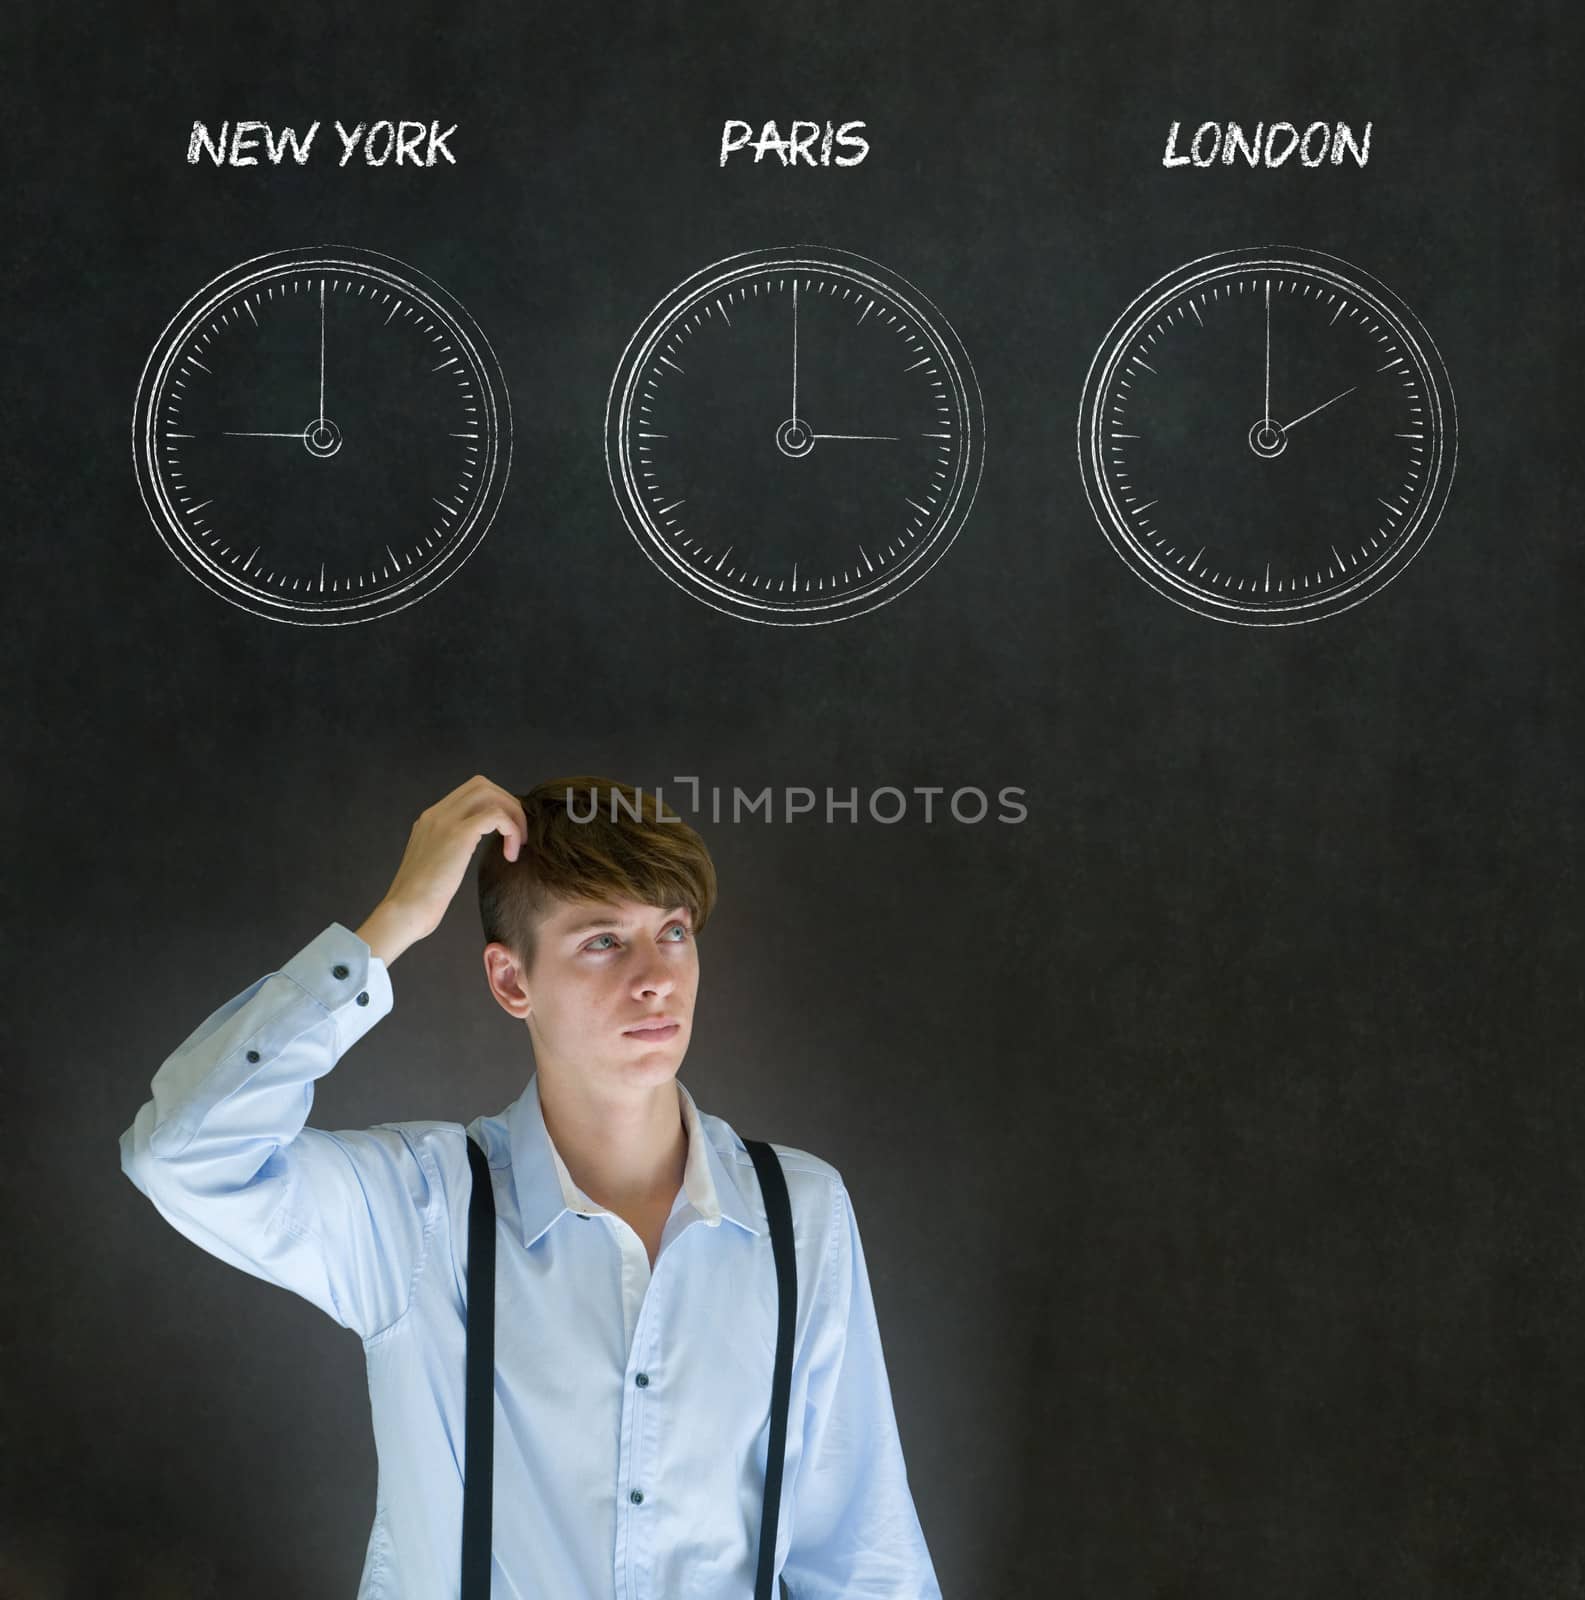 Businessman thinking with New York, Paris and London chalk time zone clocks on blackboard background by alistaircotton